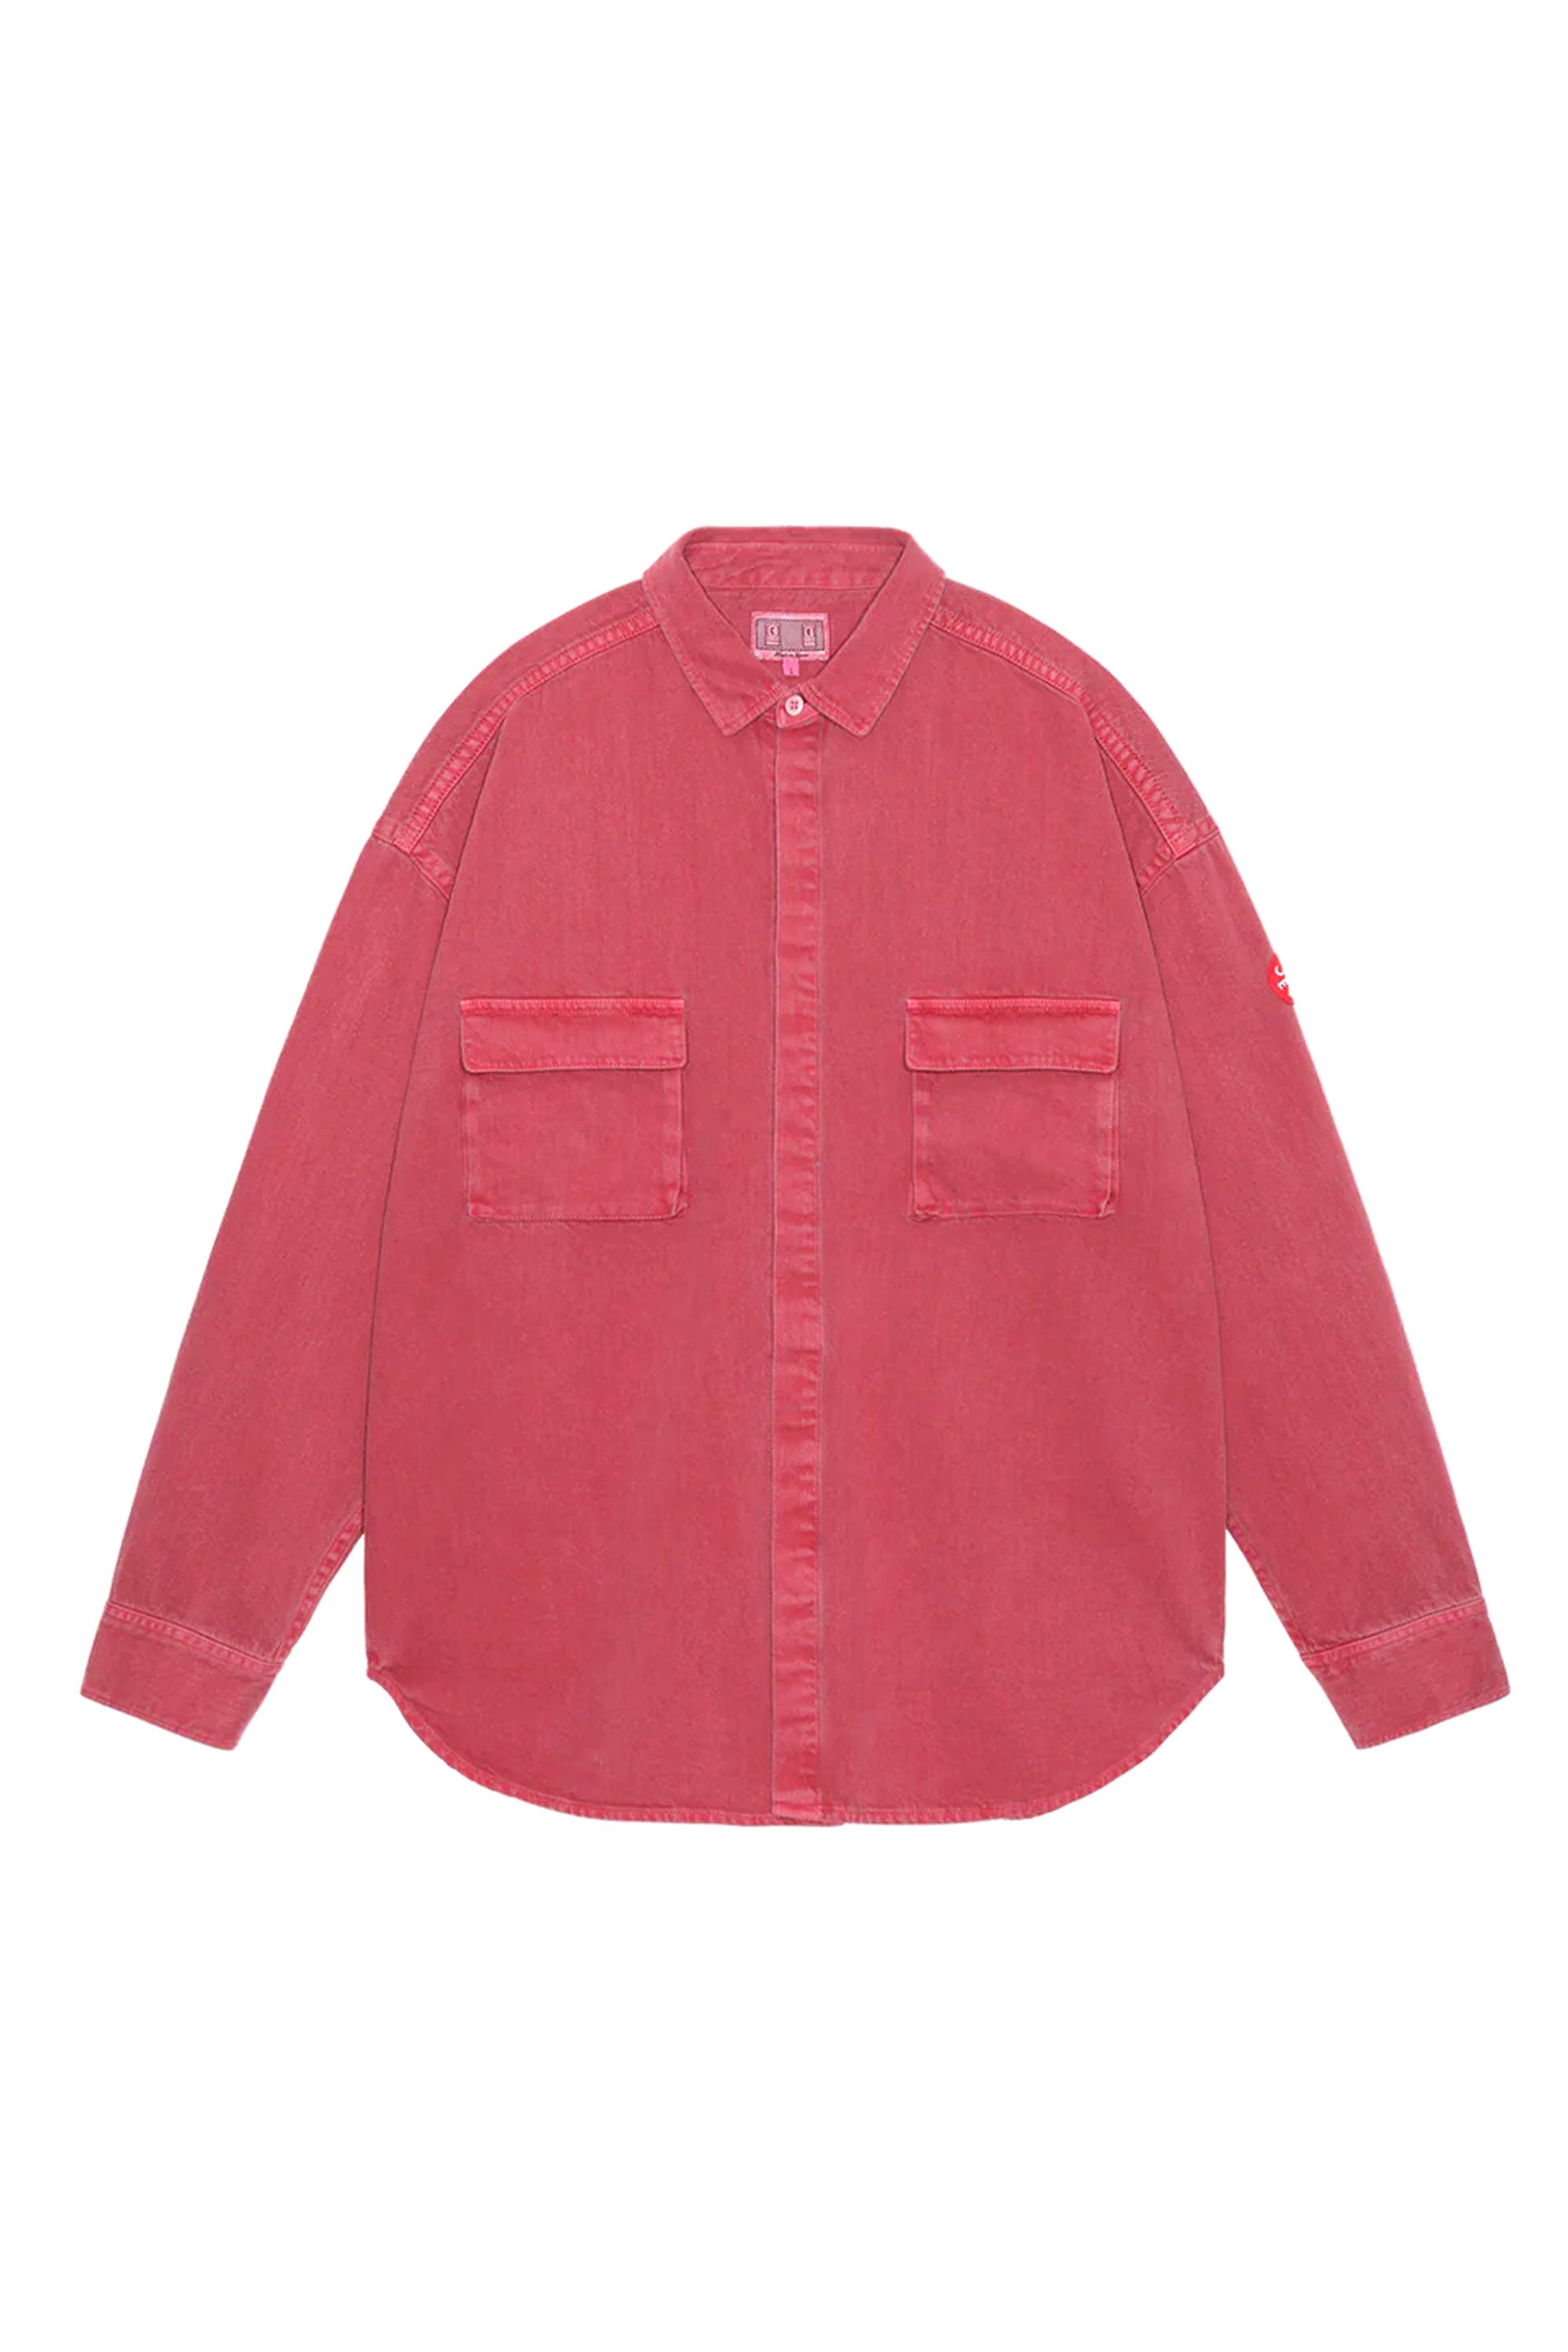 The CAV EMPT - OVERDYE COLOUR DENIM BIG SHIRT RED available online with global shipping, and in PAM Stores Melbourne and Sydney.